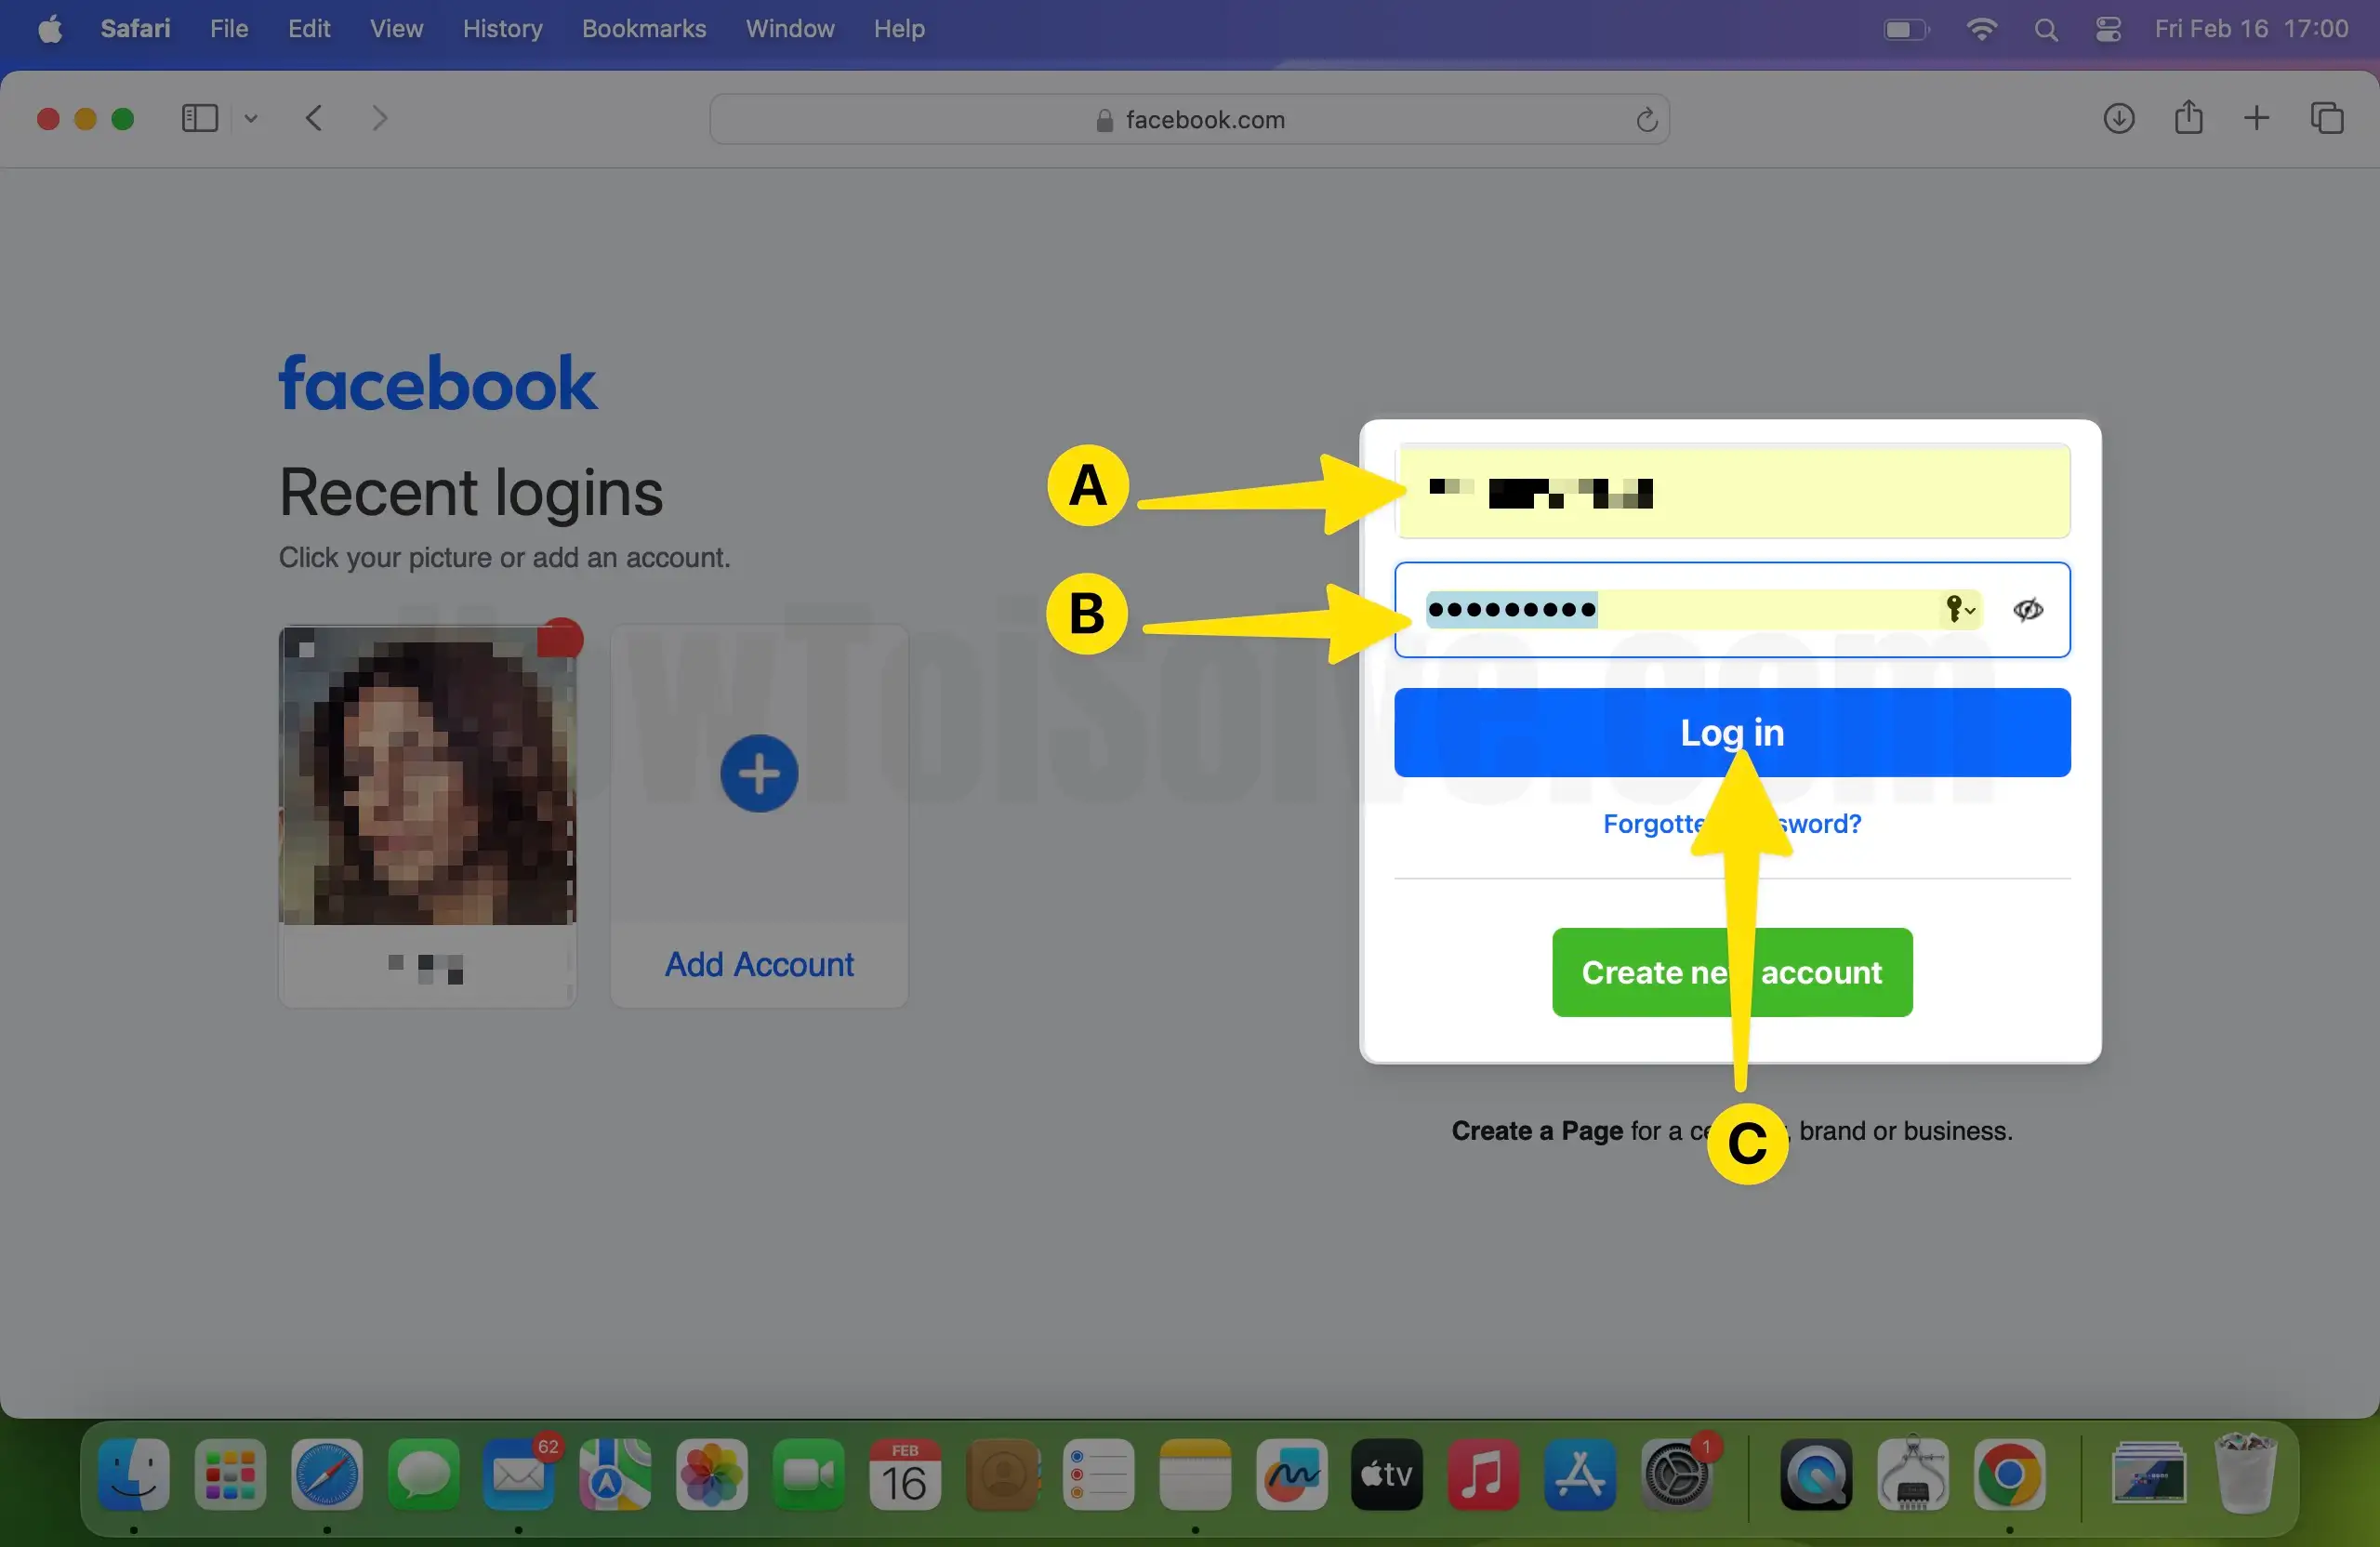 Enter Email and Password to Login Facebook Account on Mac